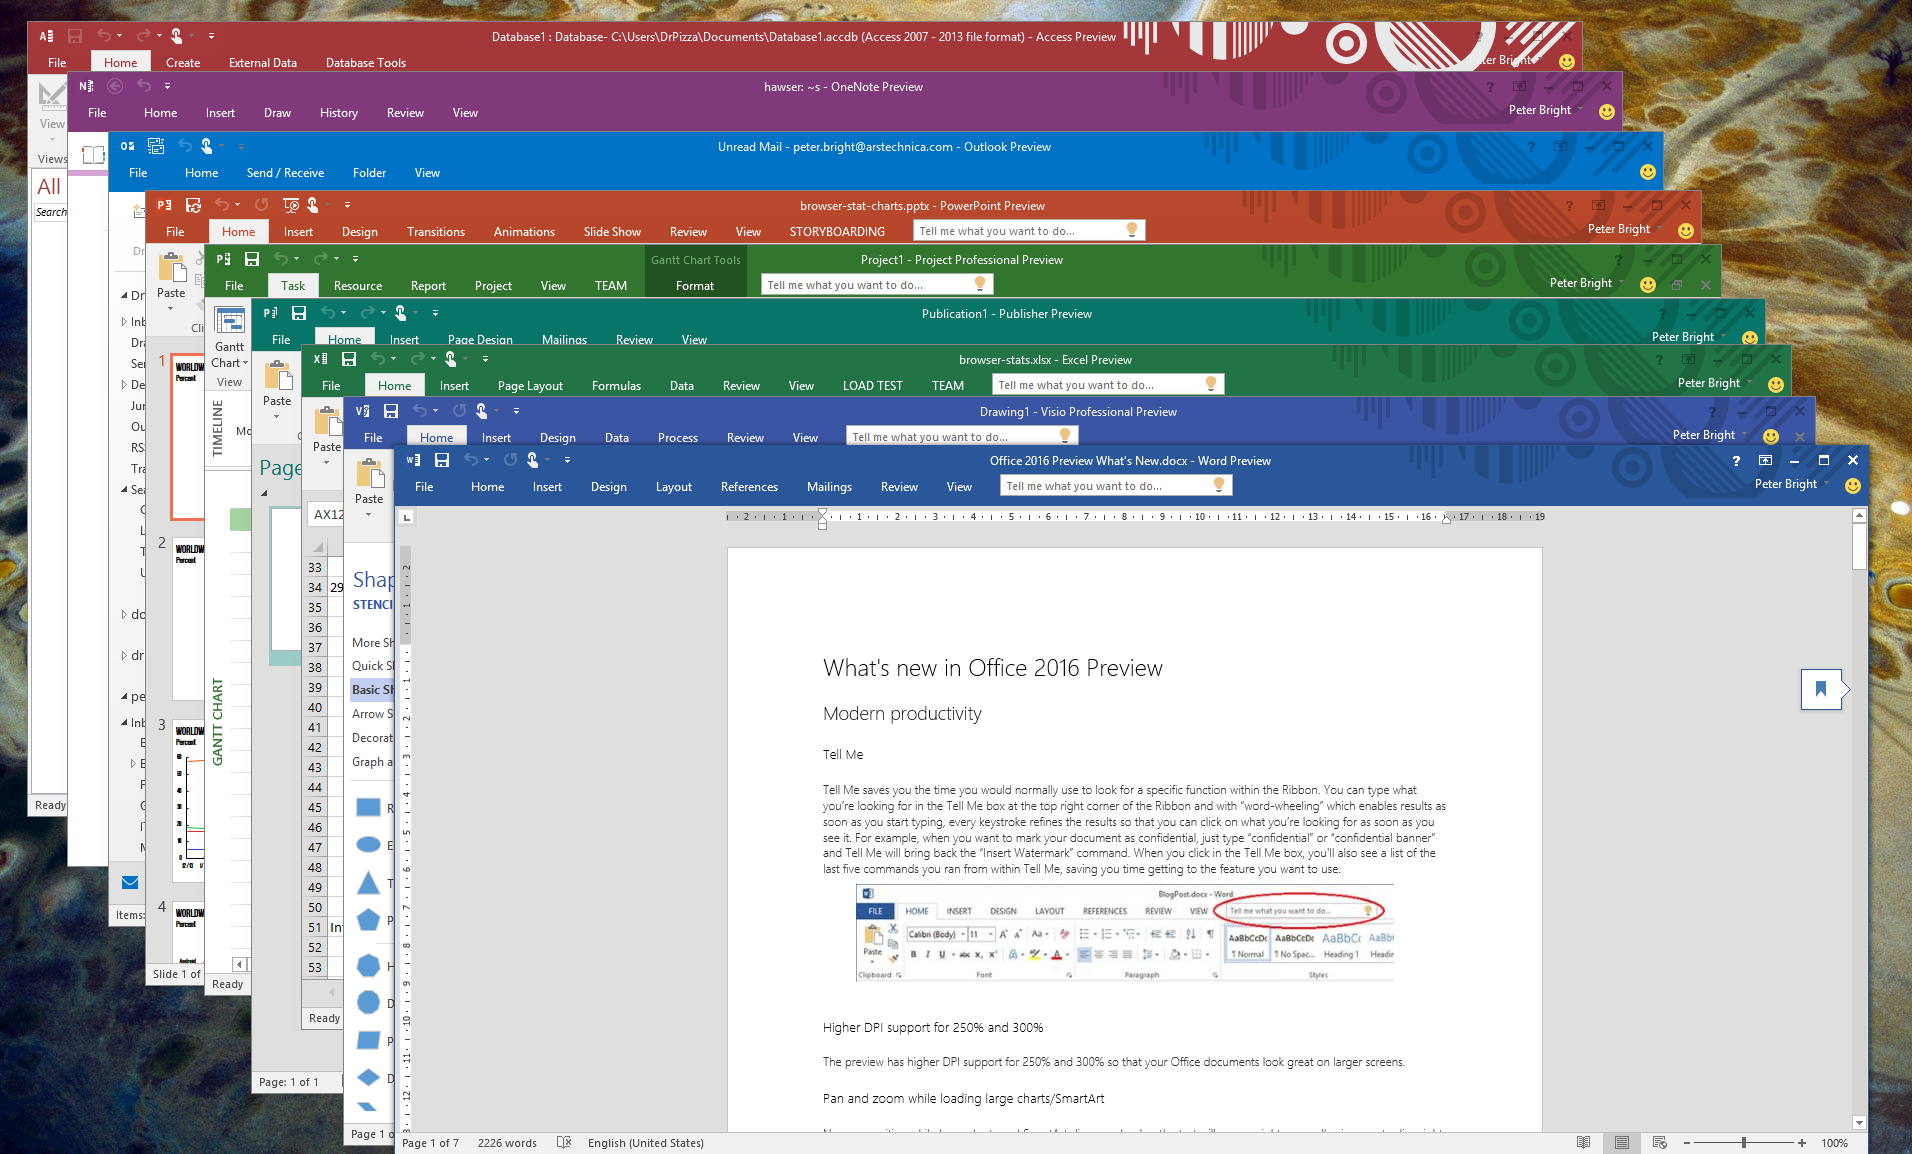 http://cdn.arstechnica.net/wp-content/uploads/2015/03/colorful-titlebars.png